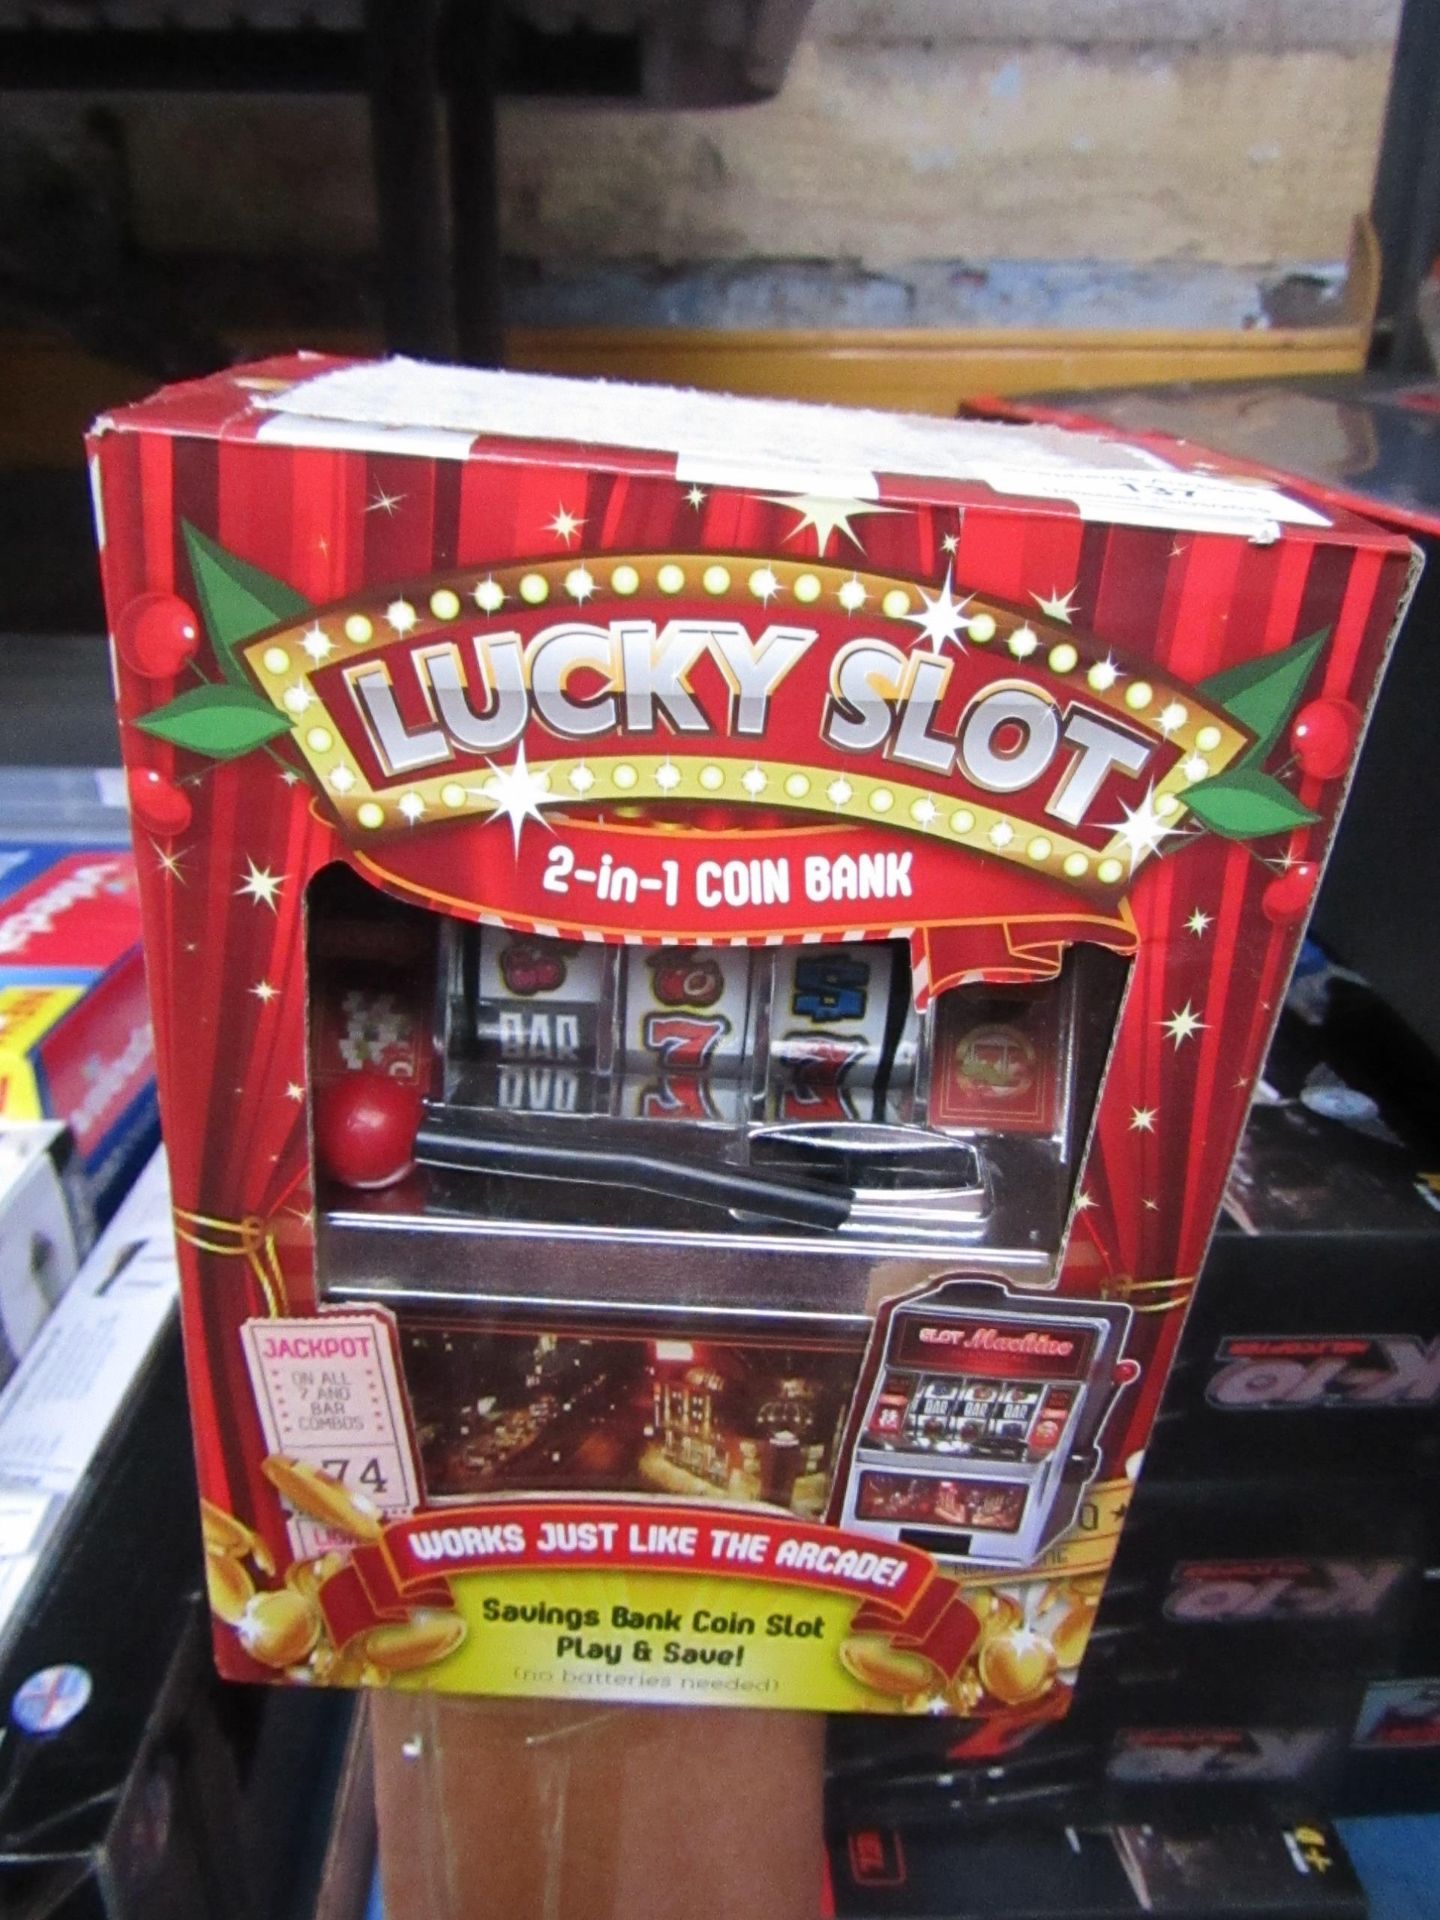 Lucky Slot 2 in1 coin bank, boxed.